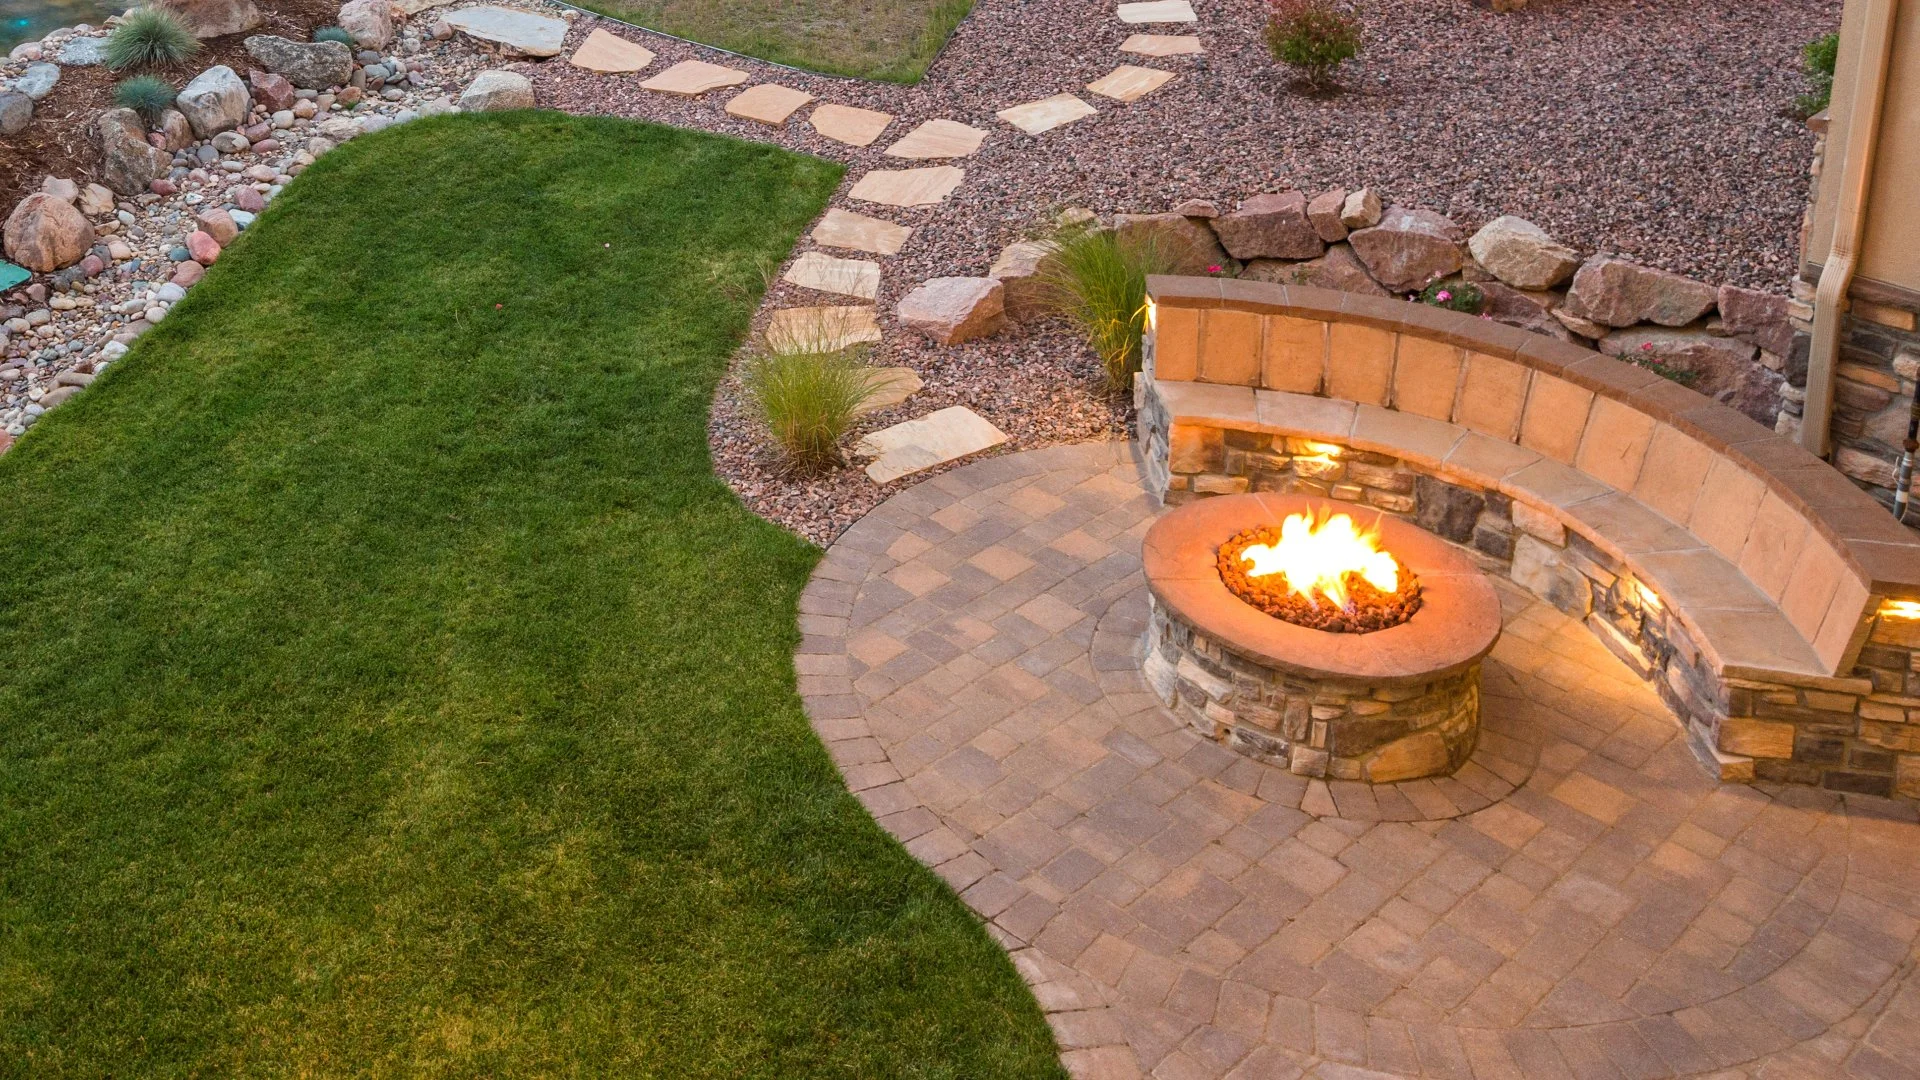 Natural Gas vs Propane vs Wood - Which Fuel Is Better for Your Fire Pit?